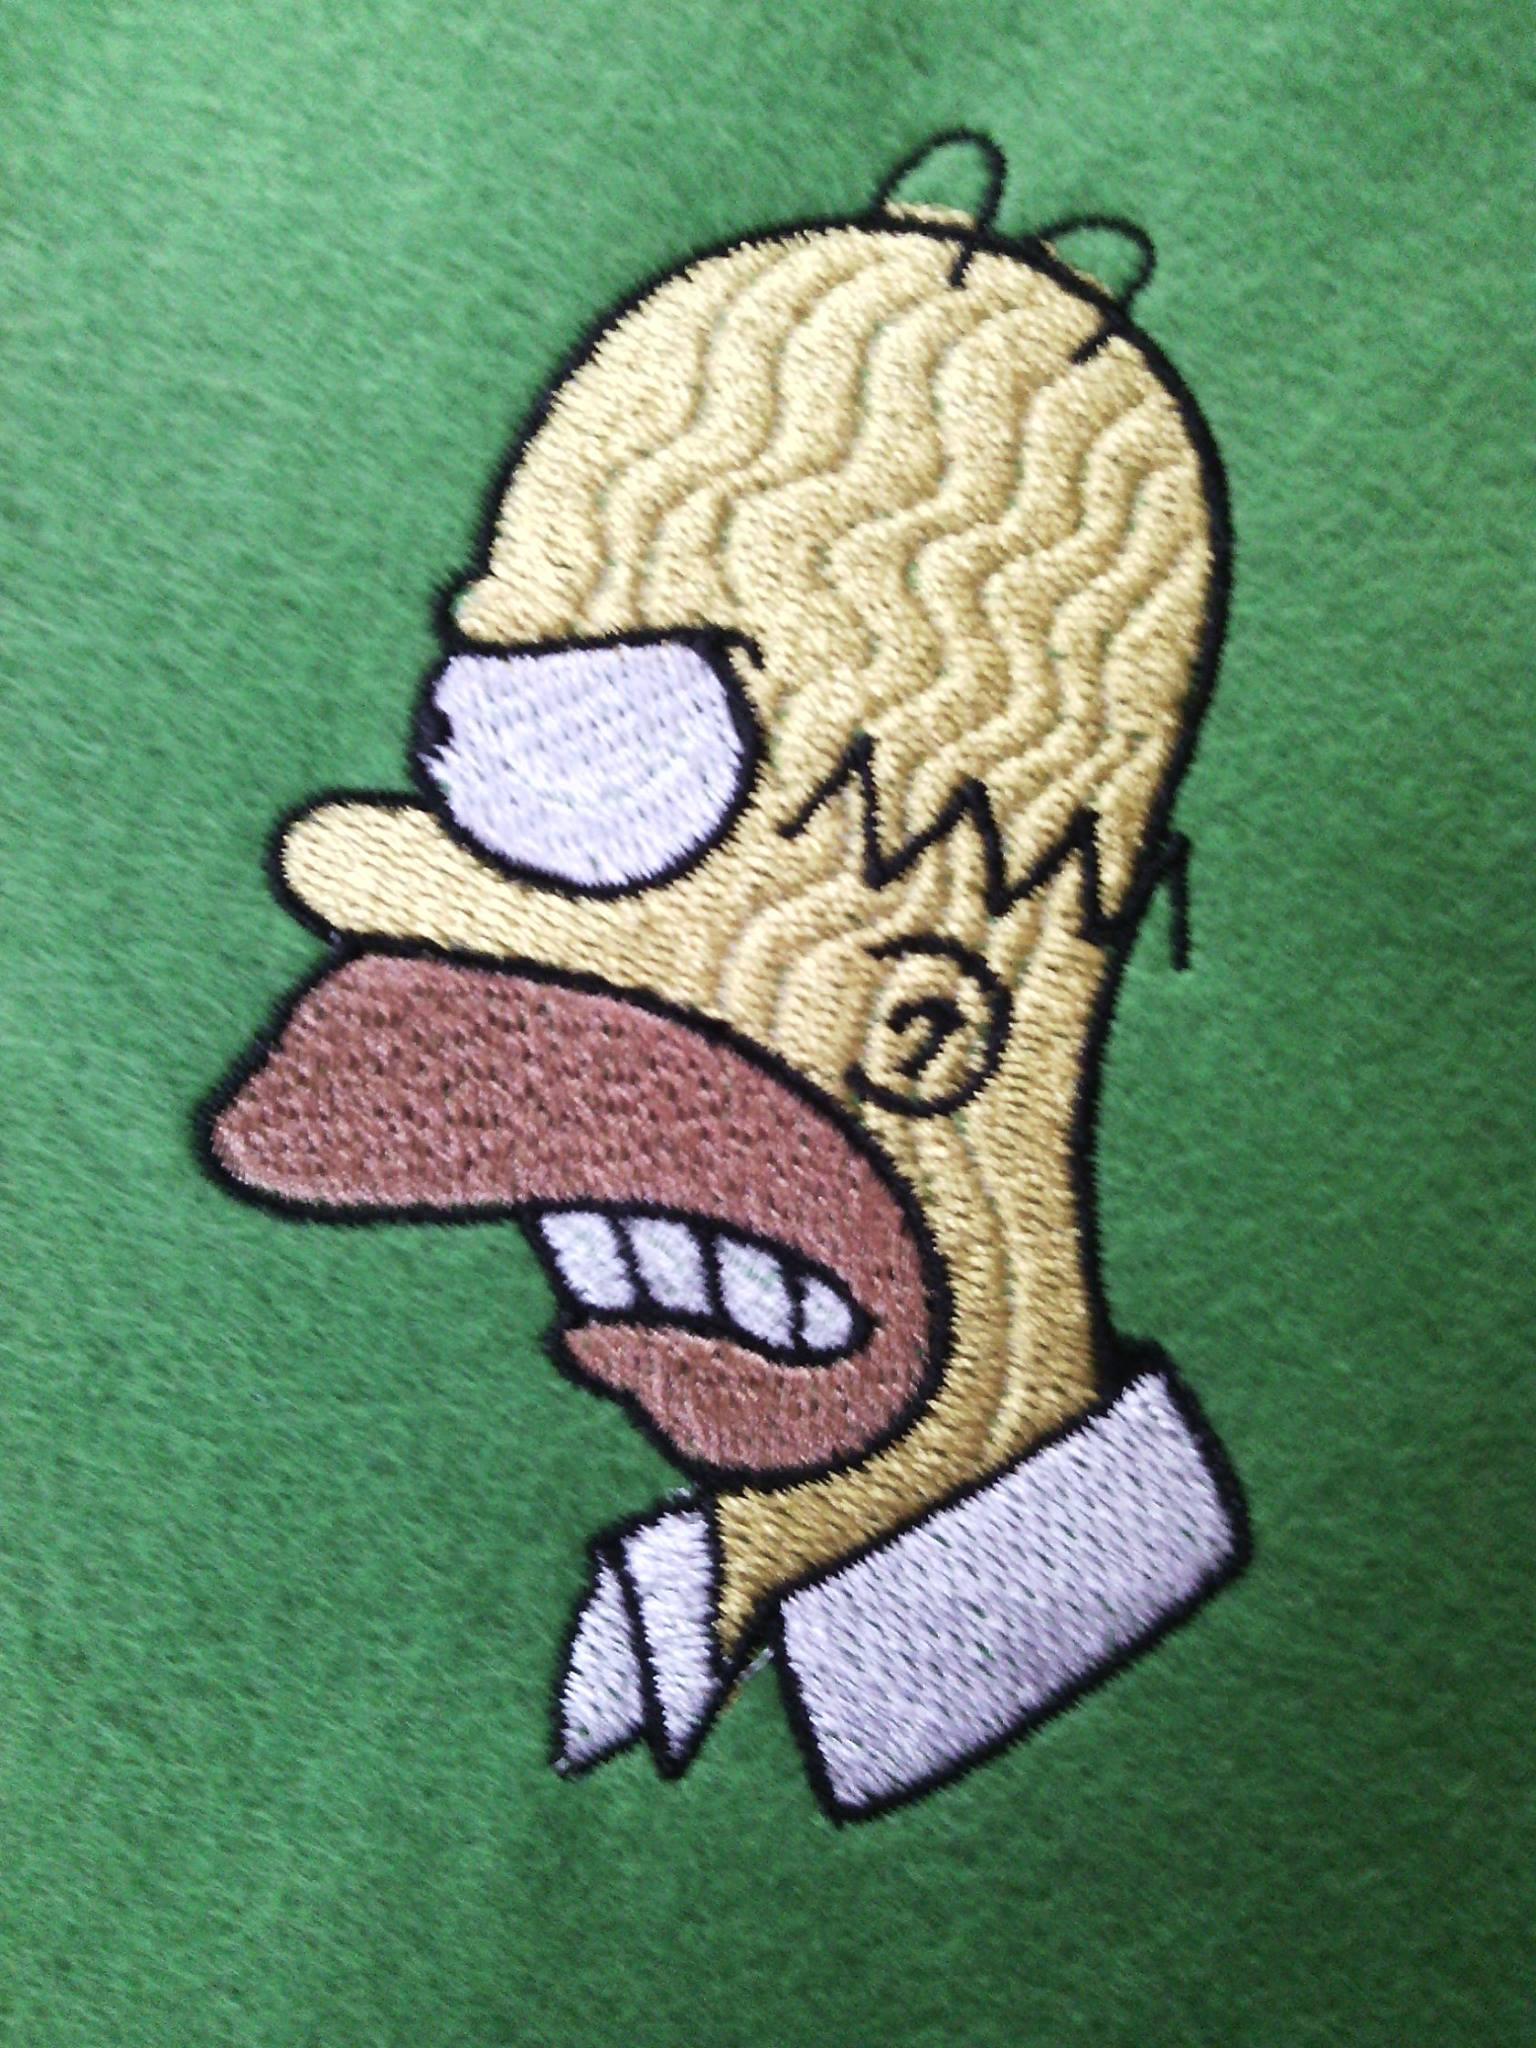 Homer Simpson embroidery design